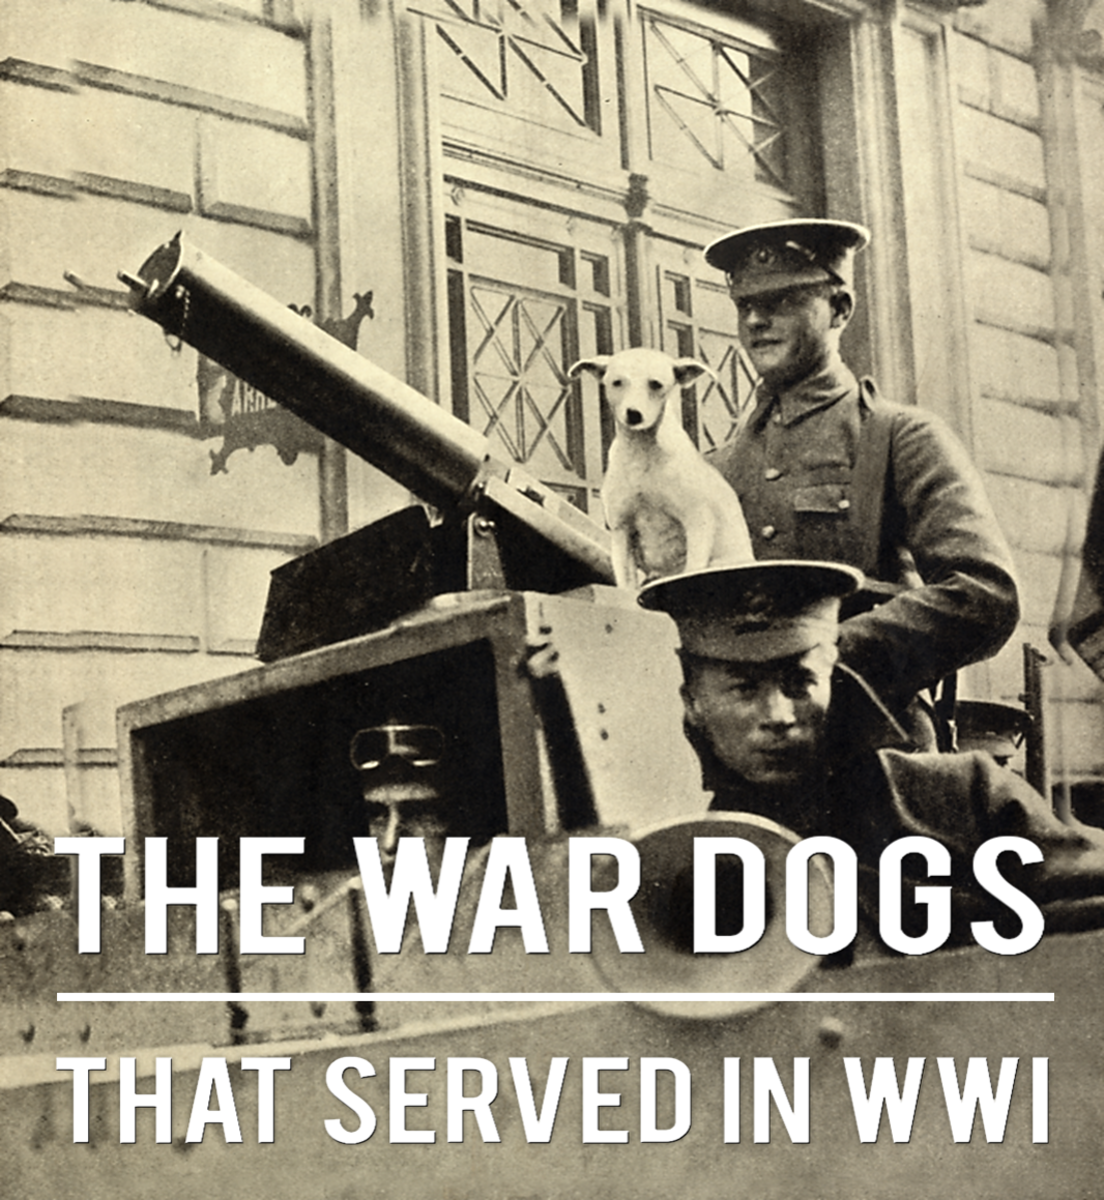 Seven Dog Breeds That Served in First World War (WWI)